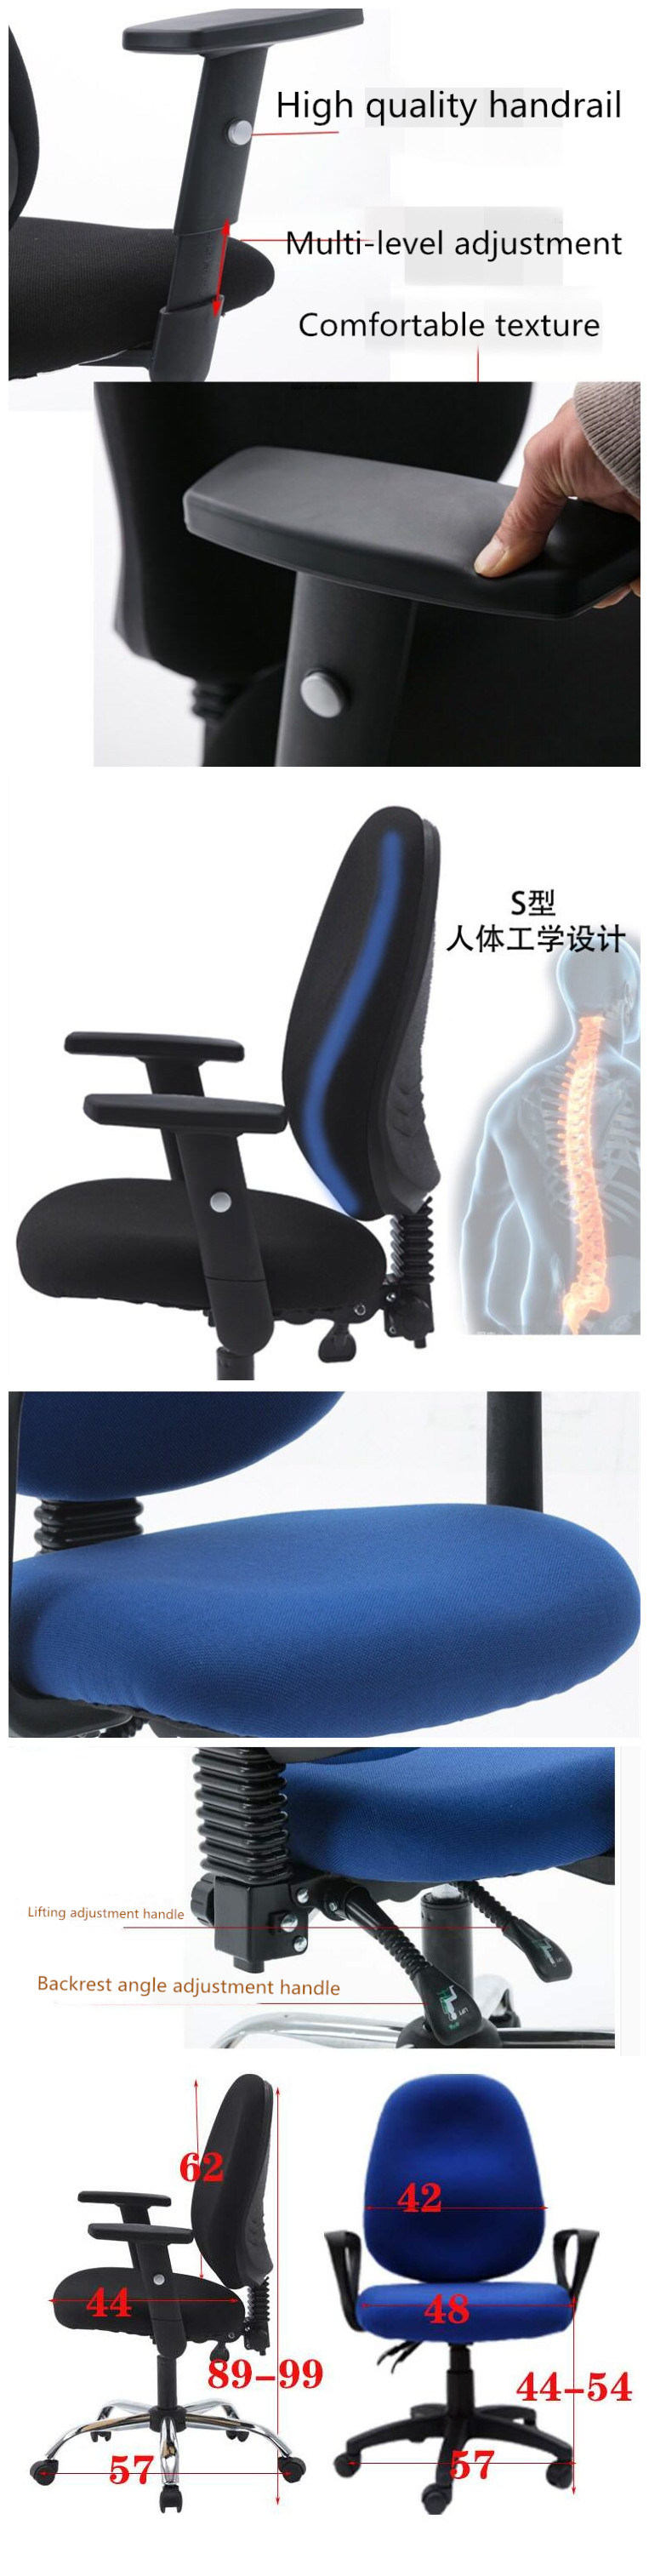 High Quality Fabric Lower Back Computer Swivel Chair